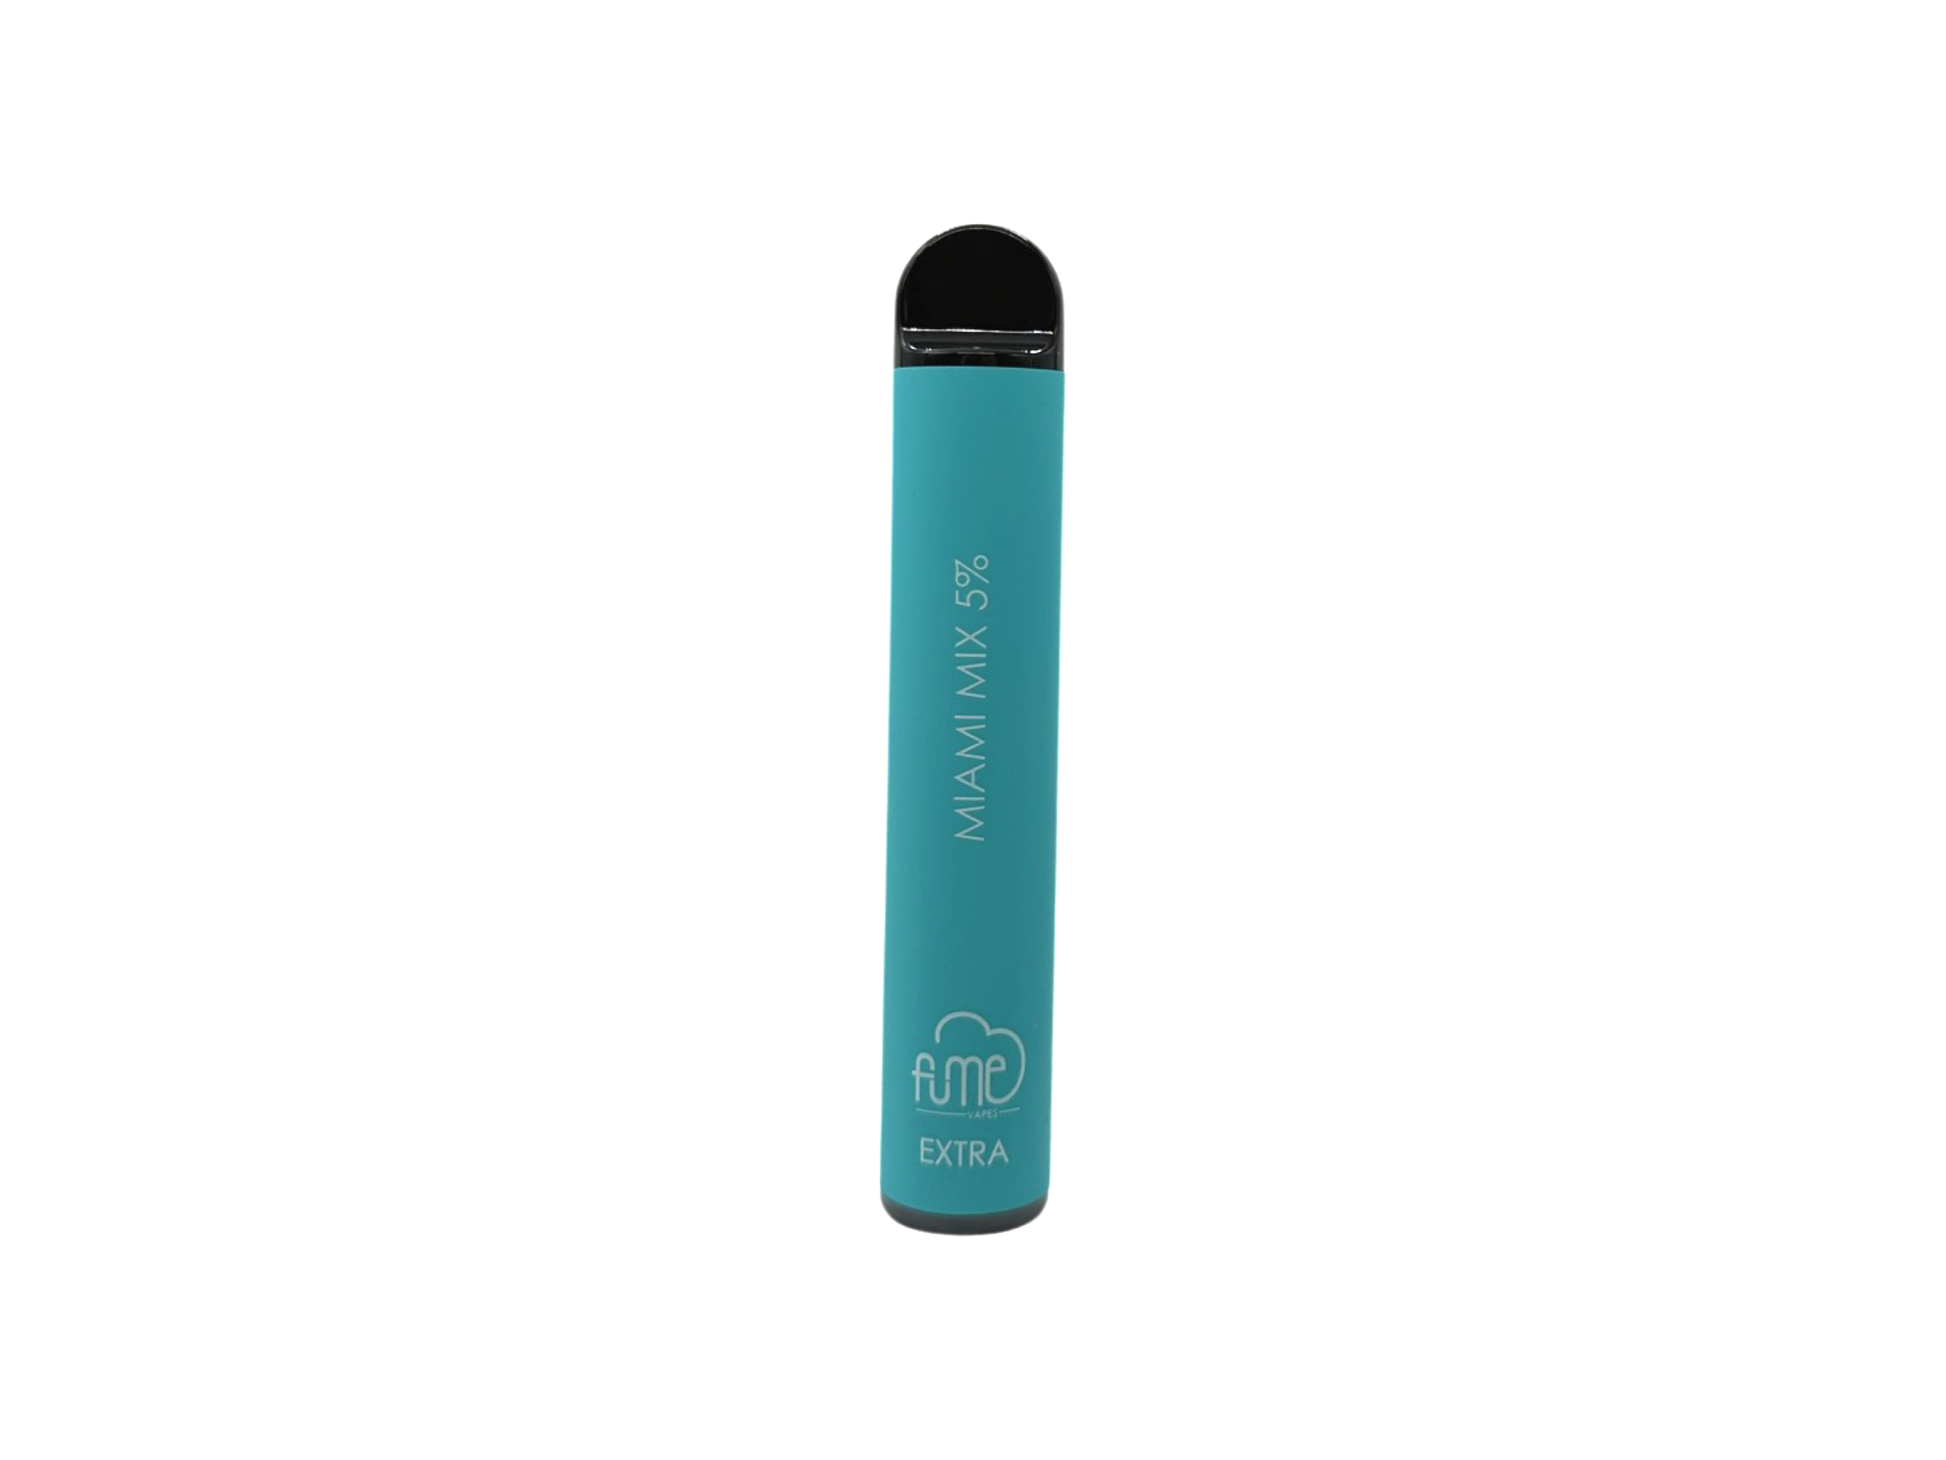 Fume Extra Miami Mix flavored disposable vape device.